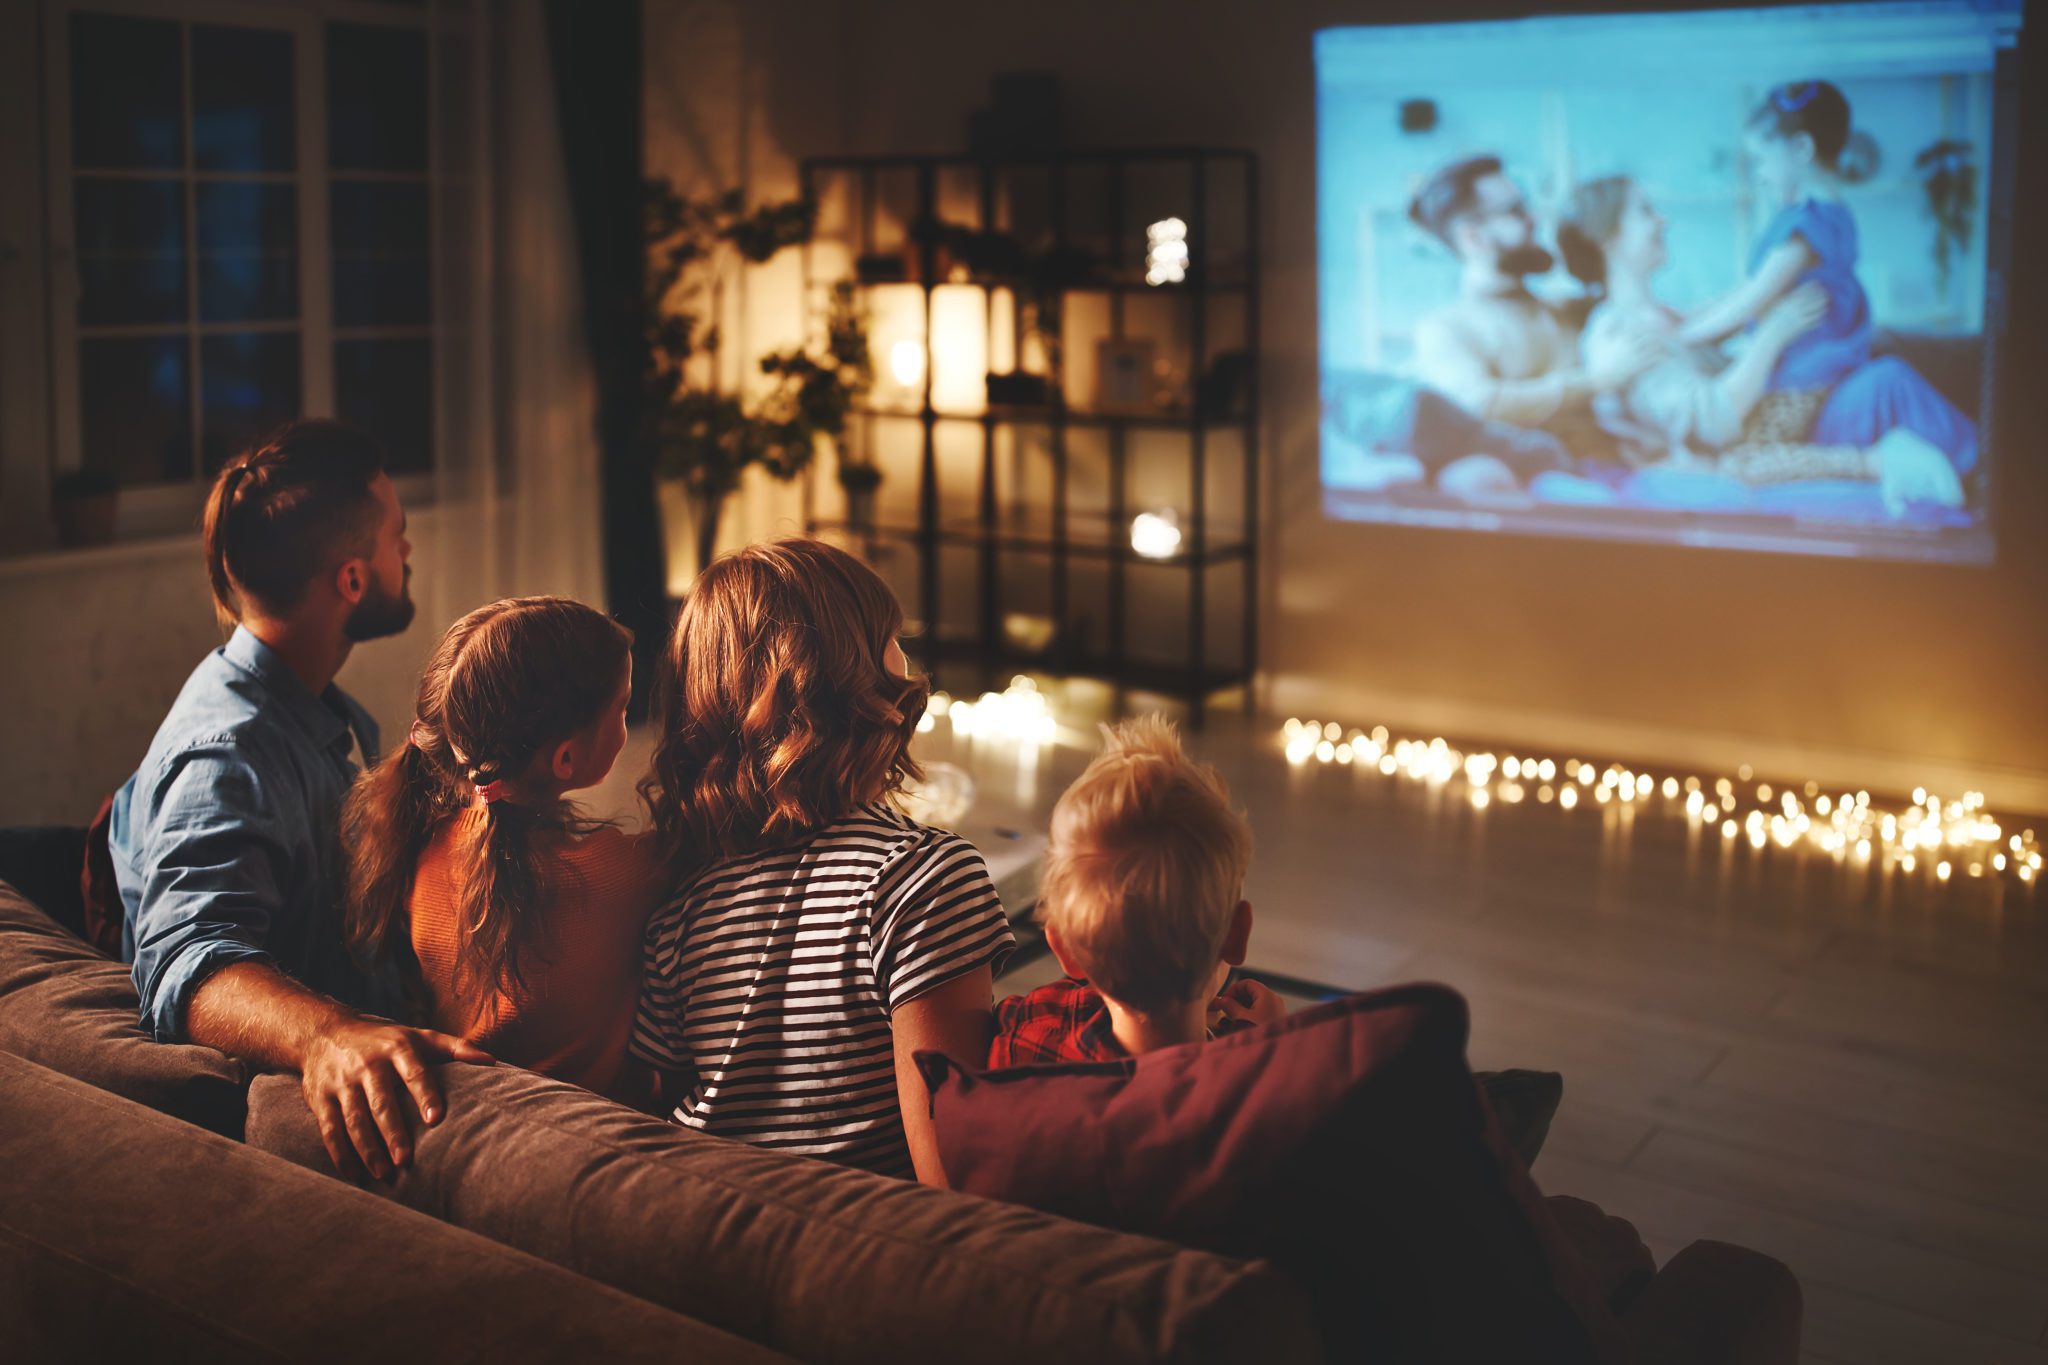 Home cinema for family activities